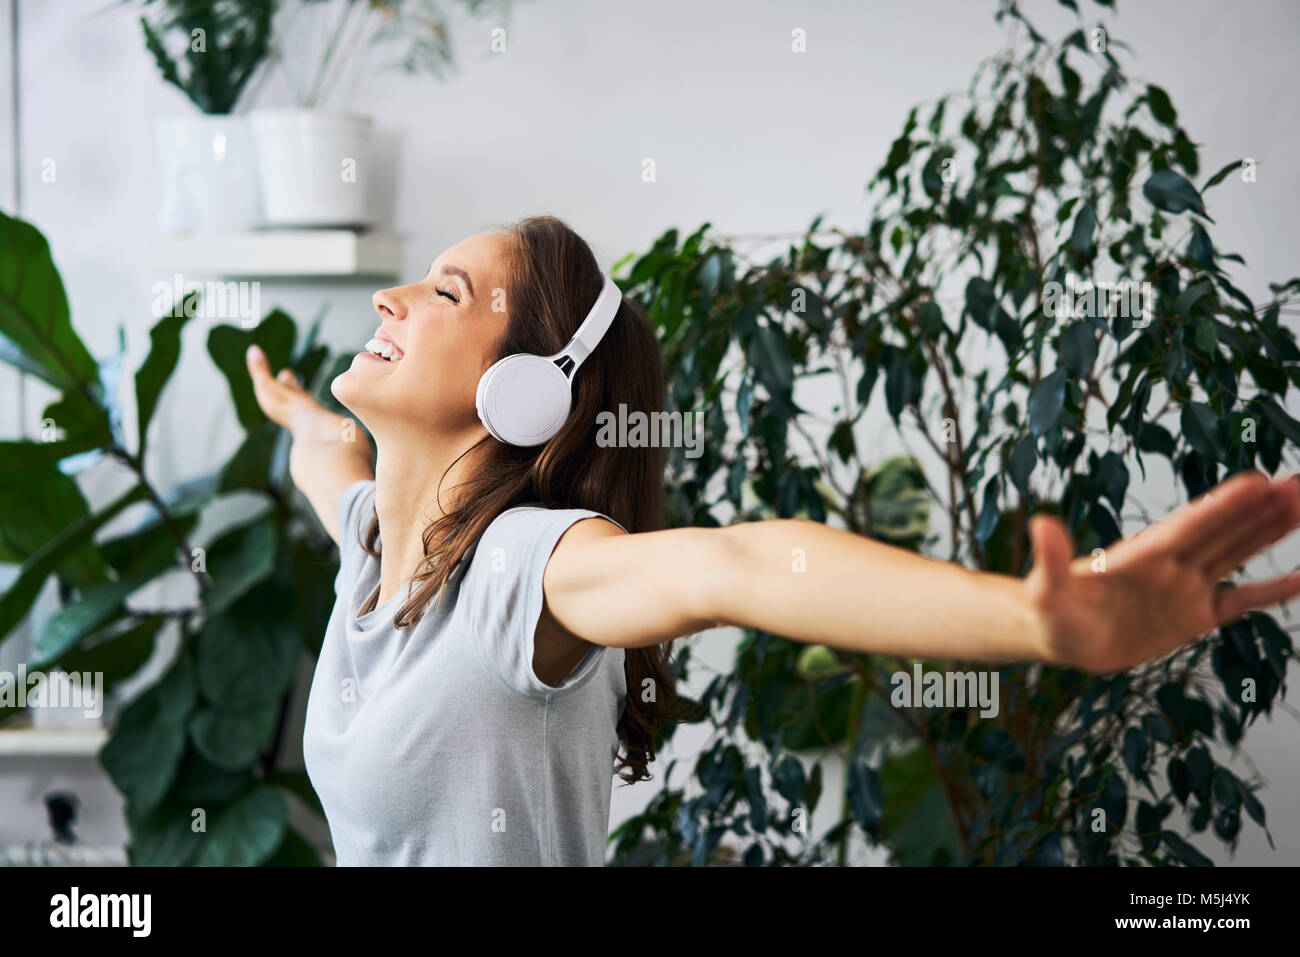 Happy young woman with oustretched arms listening to music at indoor plant Stock Photo